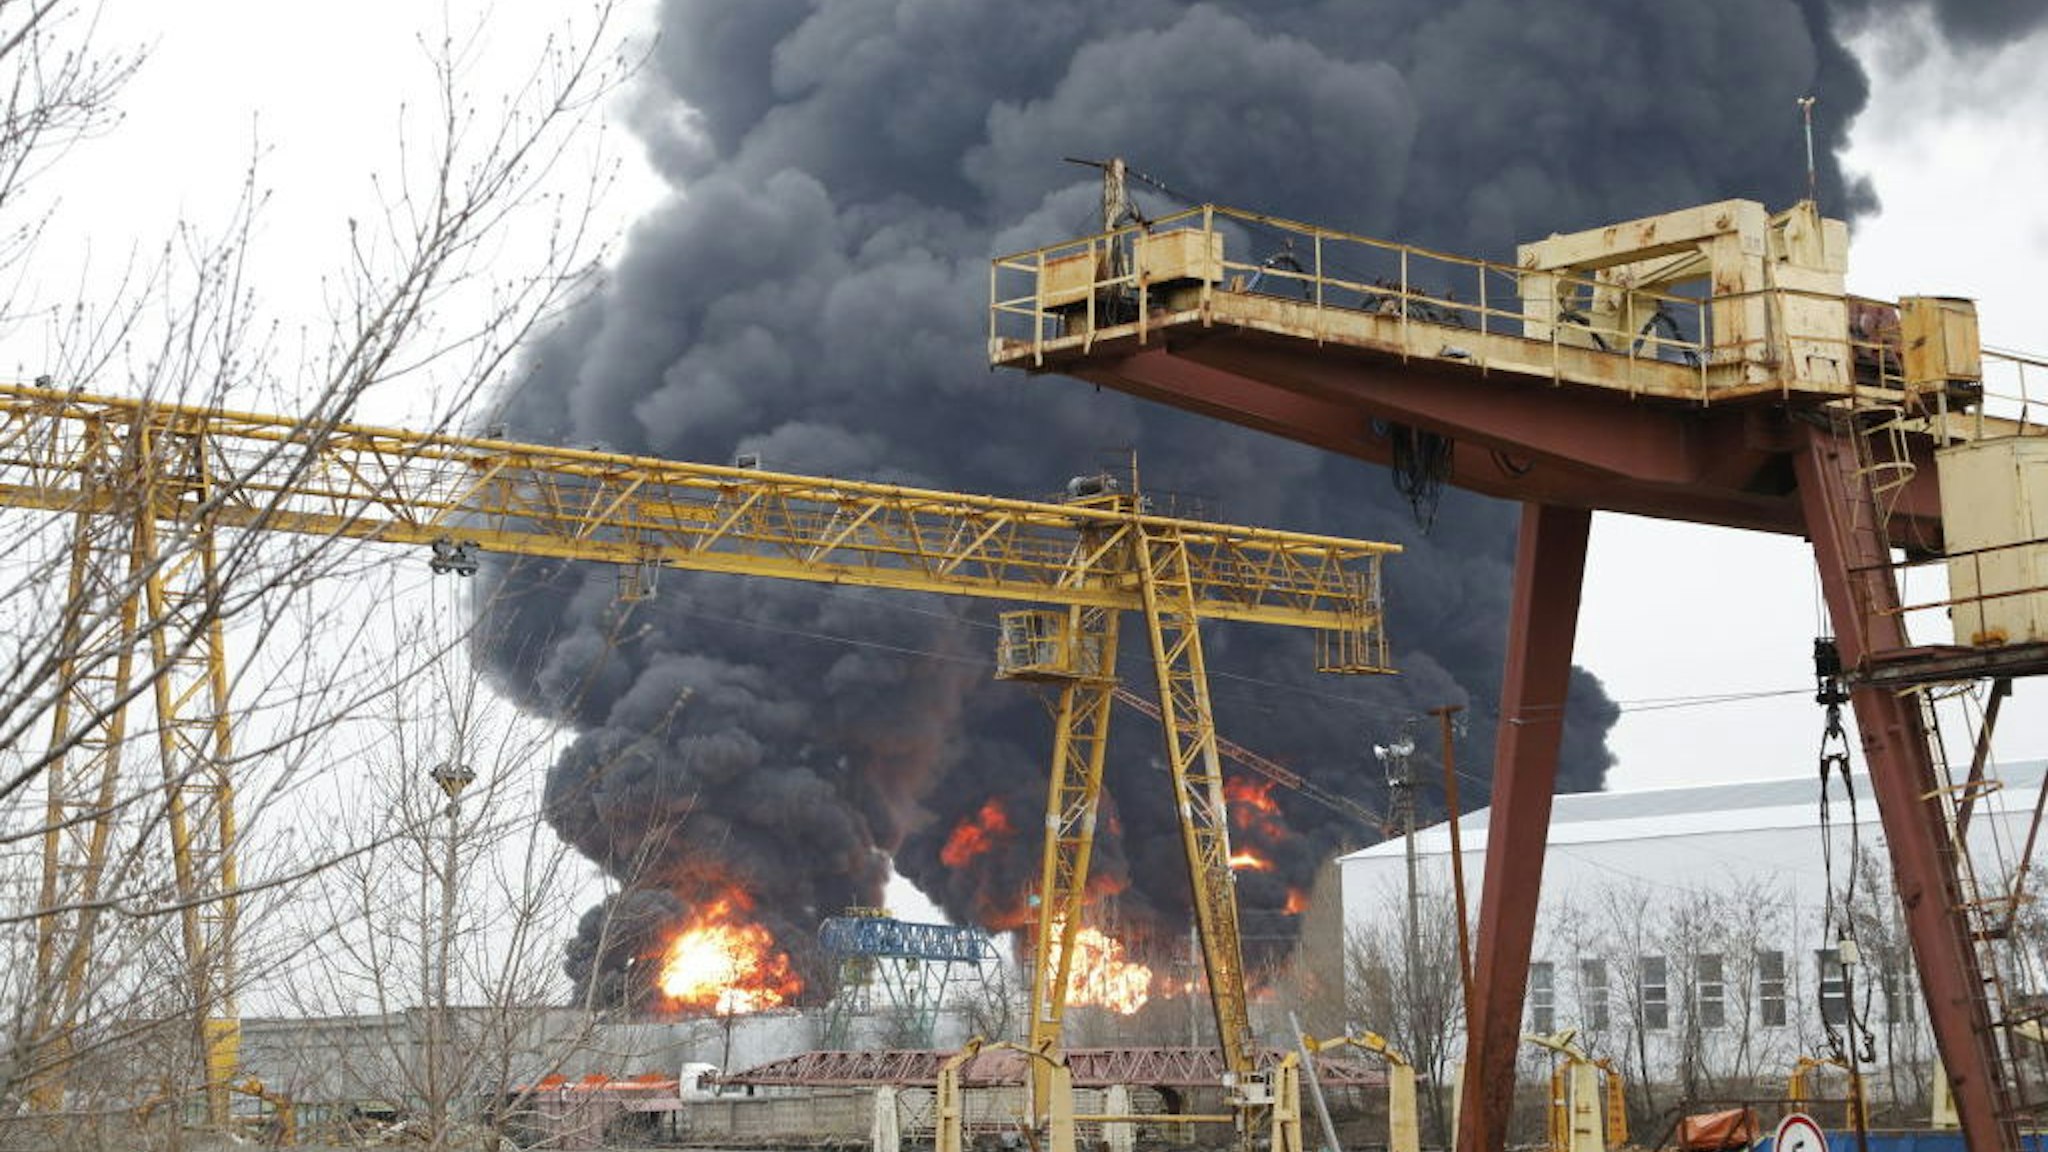 BELGOROD, RUSSIA - APRIL 1 : An image of damage after Regional Governor Vyacheslav Gladkov says that helicopters of the Ukrainian Army hit the oil refinery in Belgorod, Russia on April 1, 2022. (Photo by Stringer/Anadolu Agency via Getty Images)